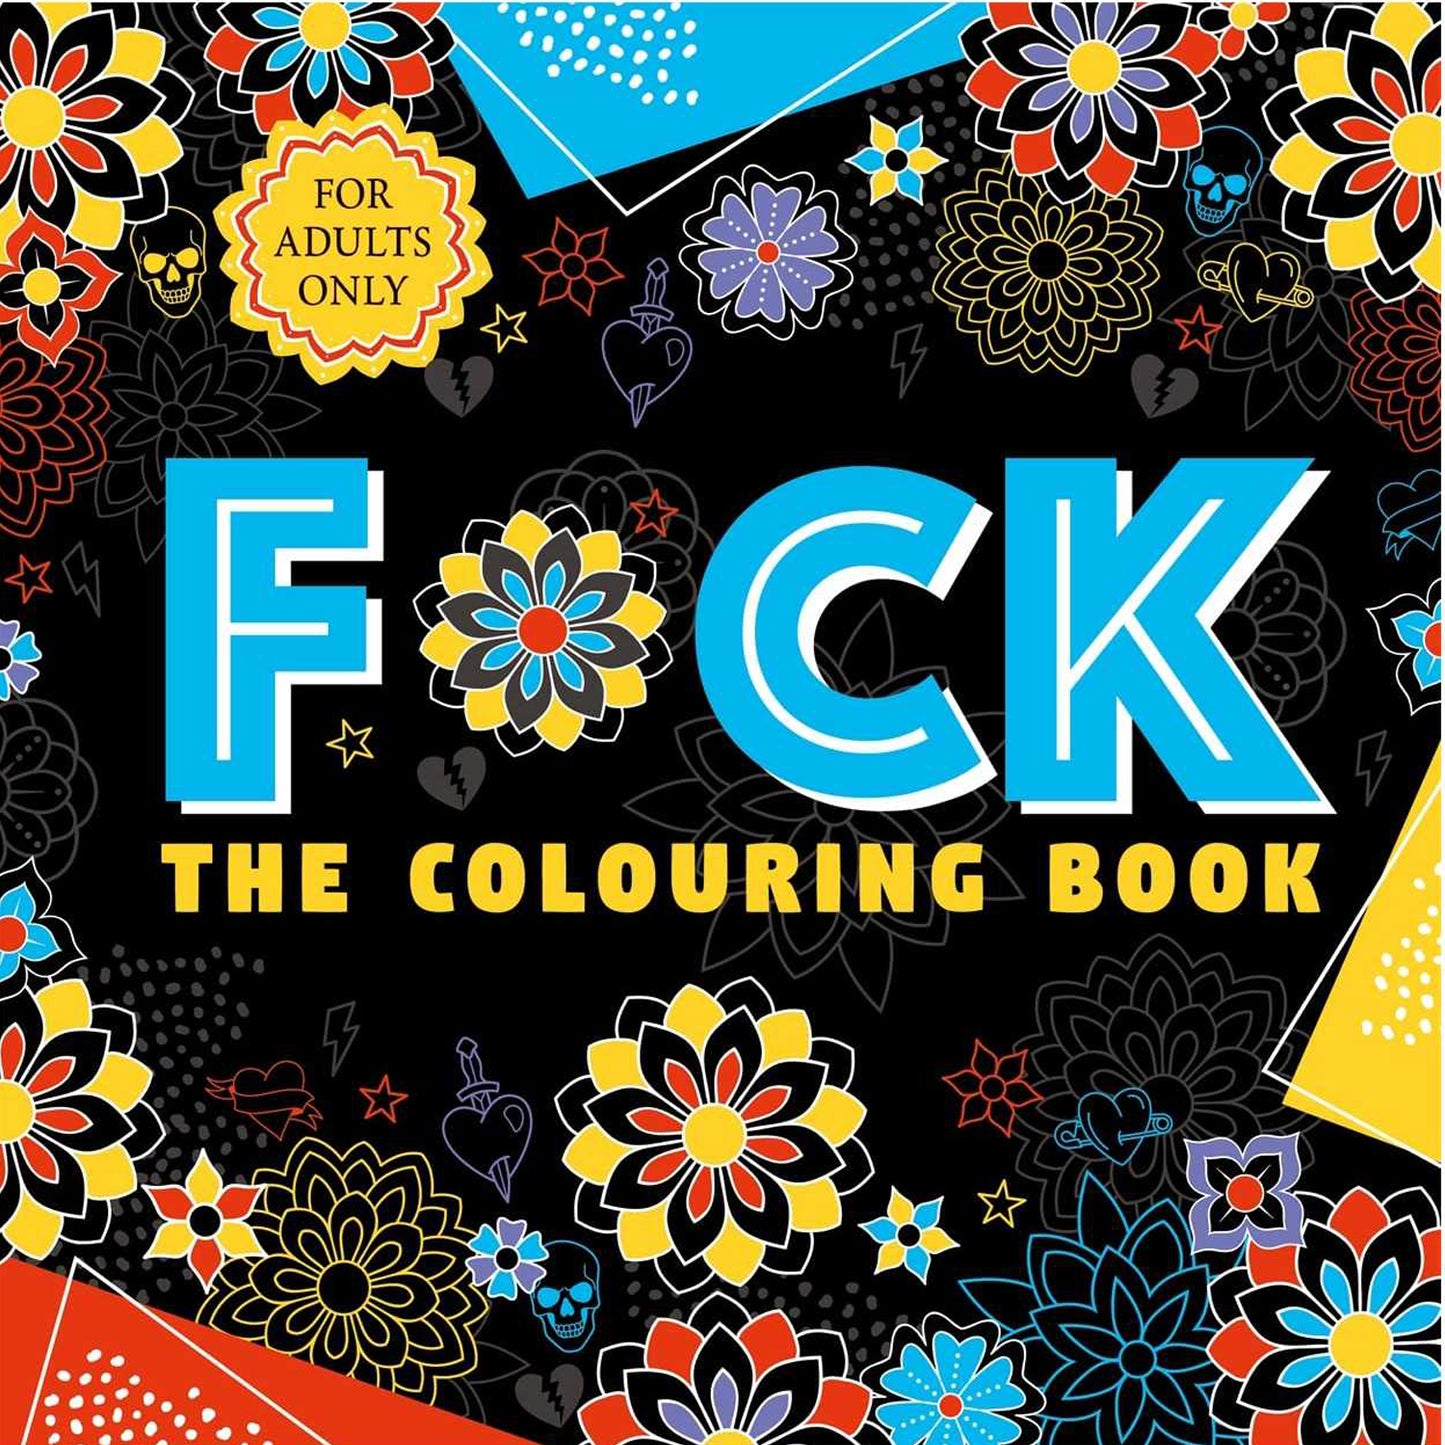 F*ck the Colouring Book